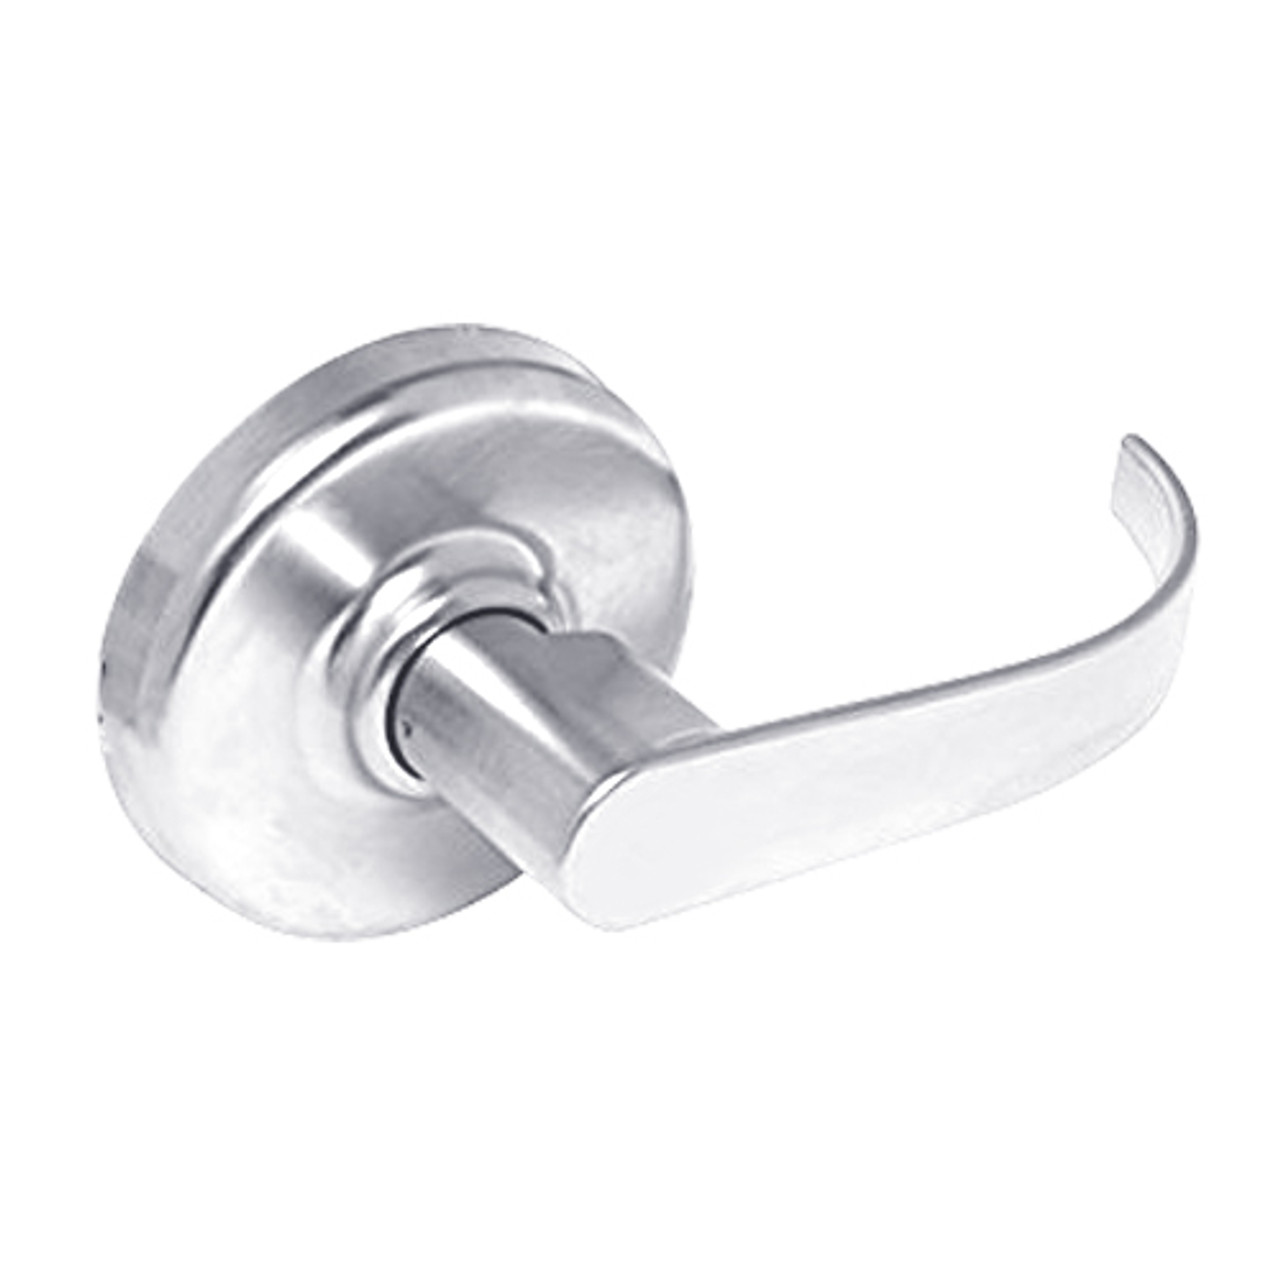 CL3110-PZD-625 Corbin CL3100 Series Vandal Resistant Passage Cylindrical Locksets with Princeton Lever in Bright Chrome Finish